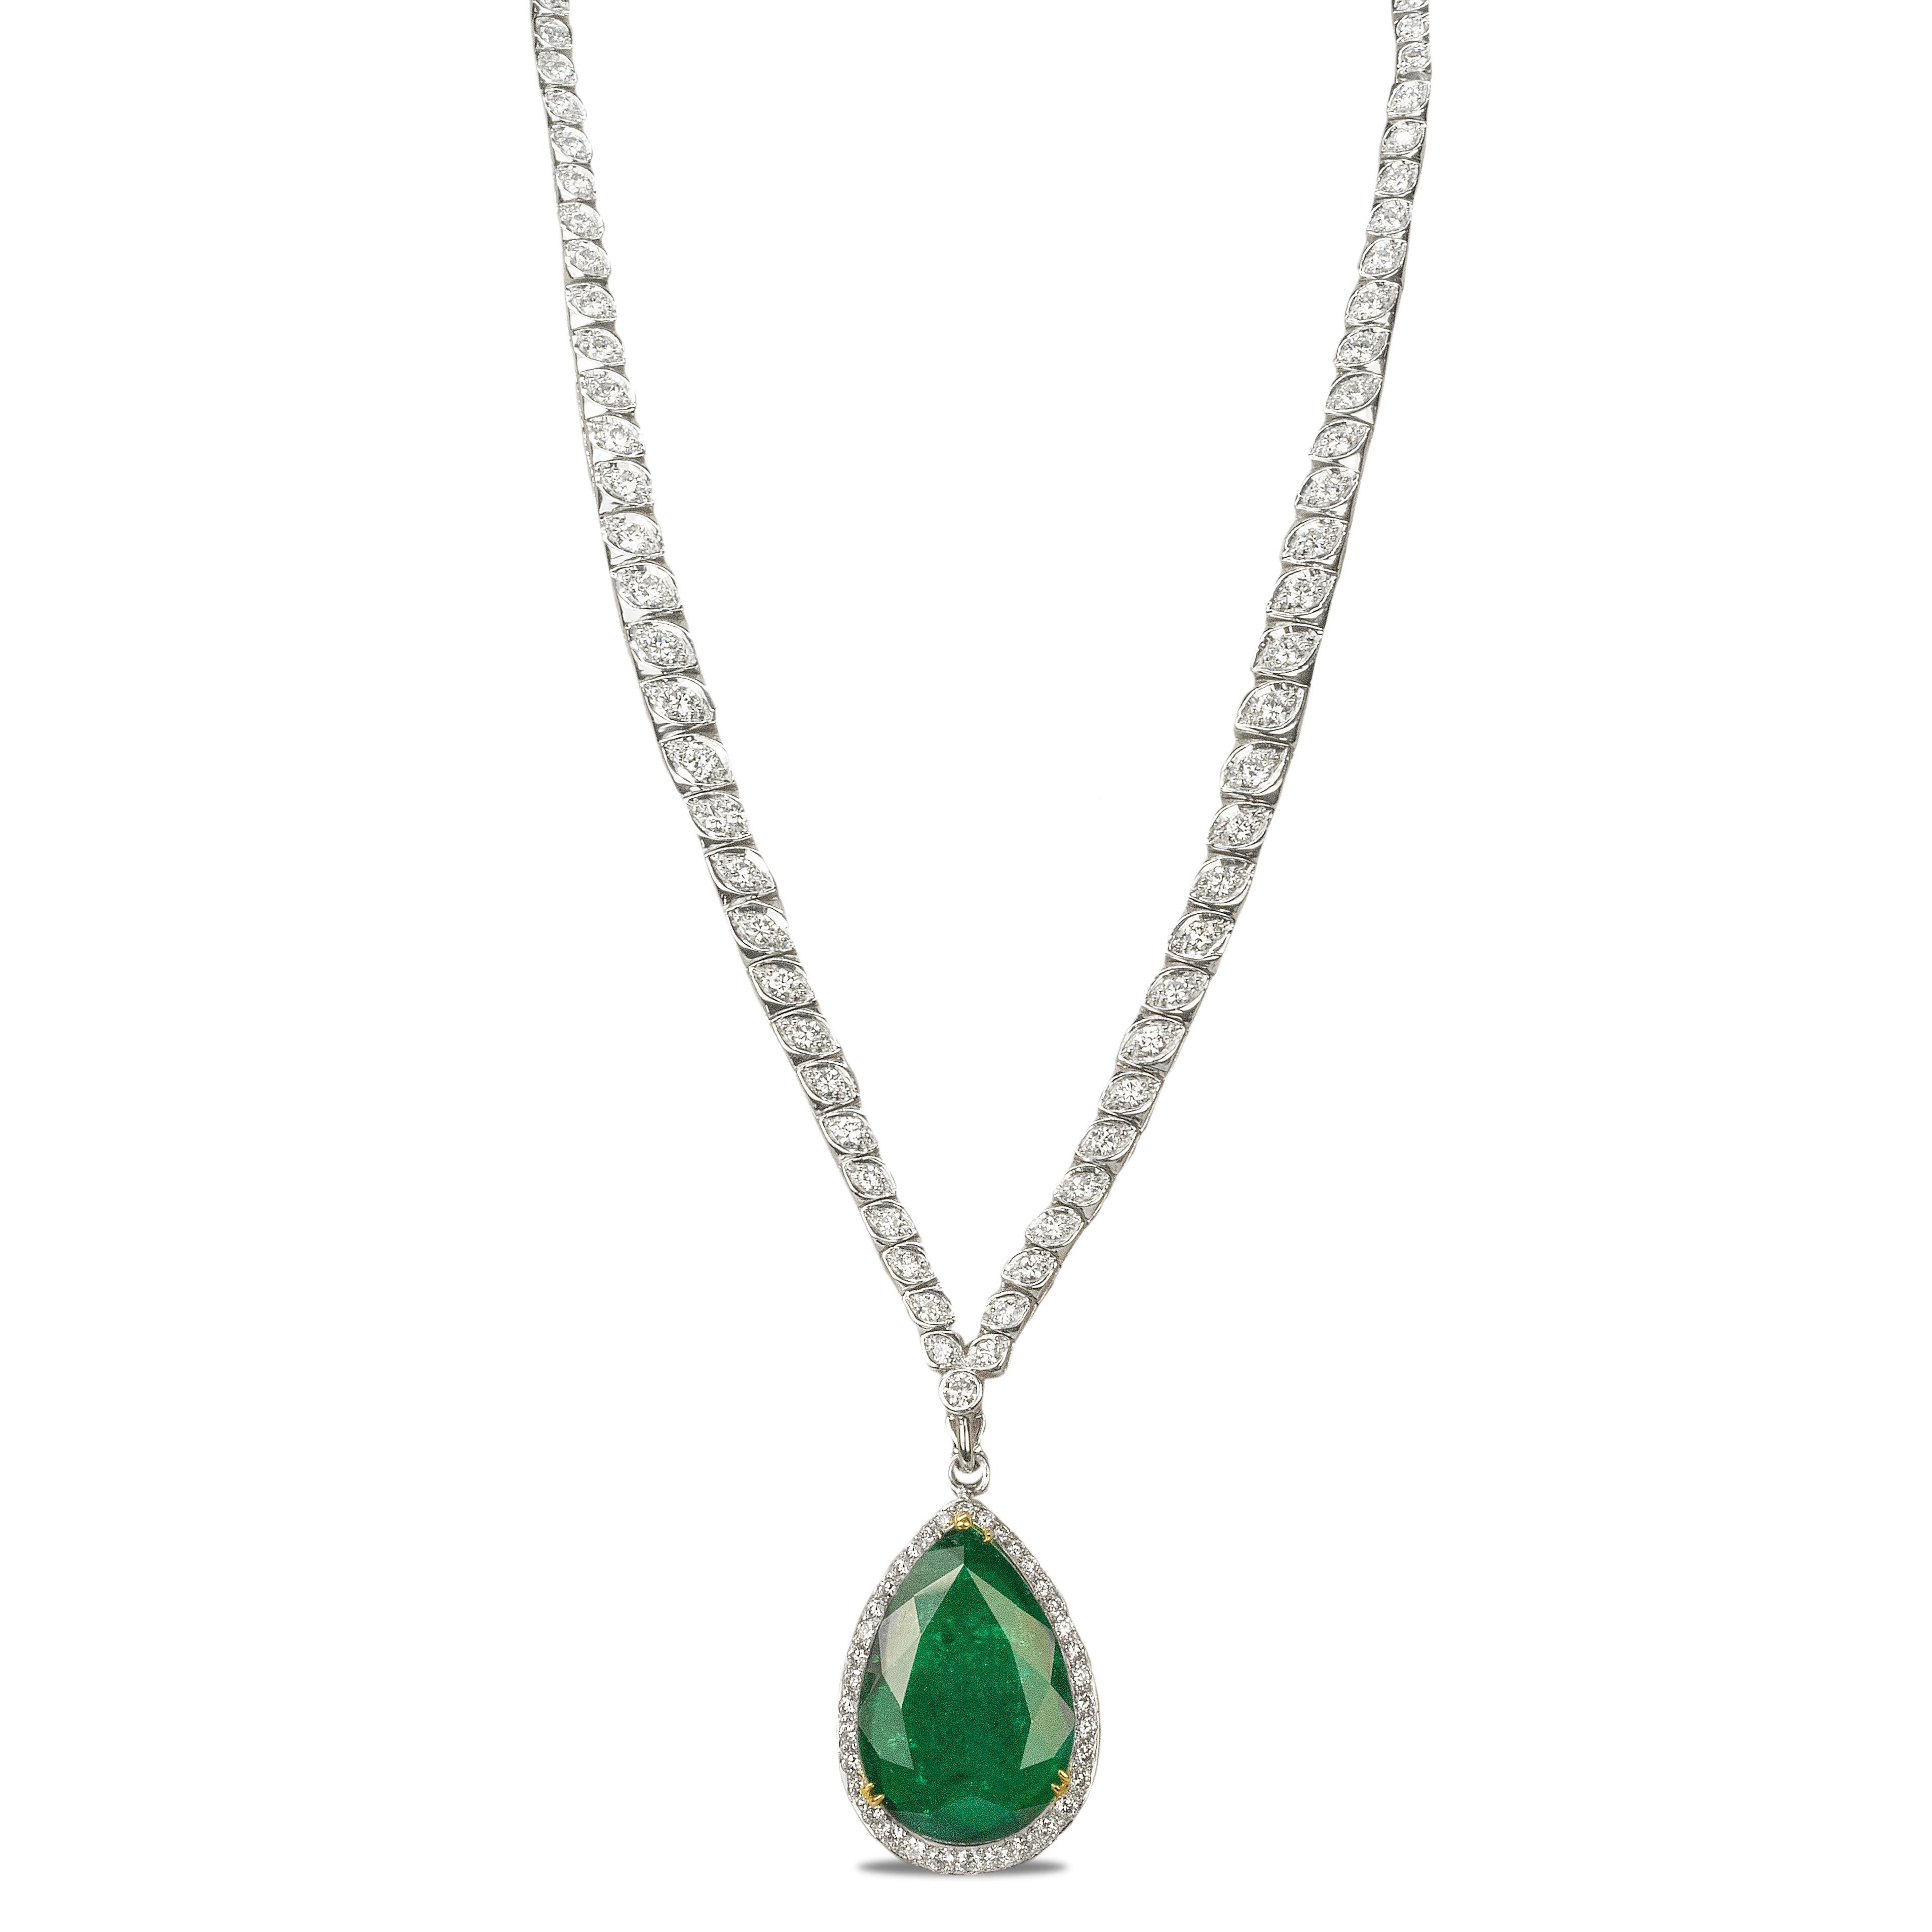 Platinum Necklace with 126 round brilliants and 3 baguette diamonds weighing approximately 5.50 carats. Suspended from the bottom is one detachable pendant containing one pear shape emerald weighing 10.11 carats and round brilliant diamonds weighing